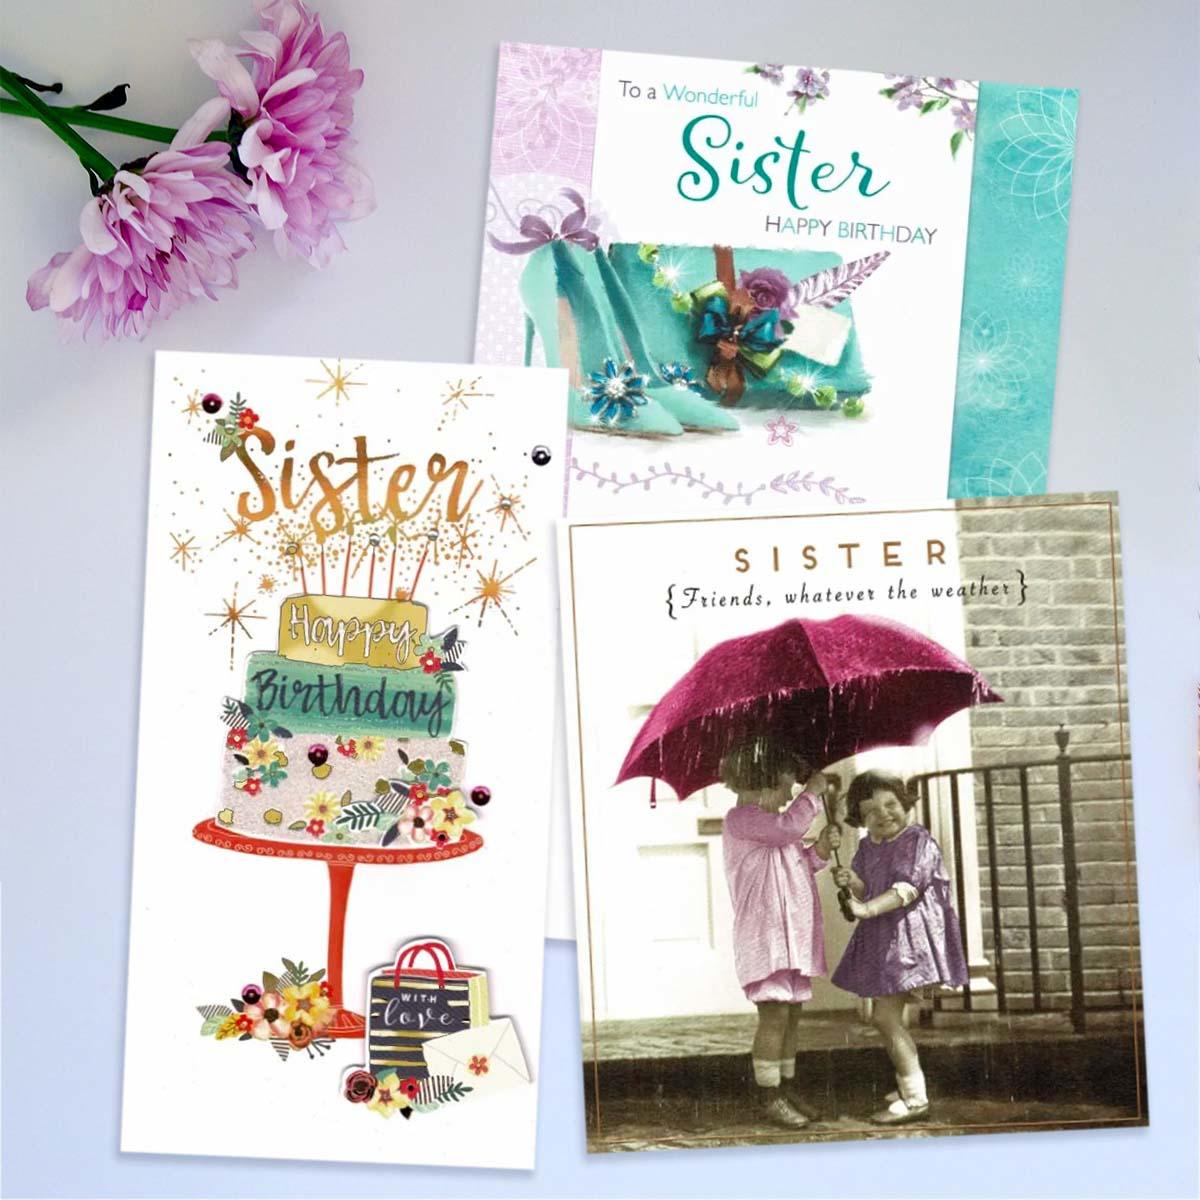 A Selection Of Cards To Show The Depth Of Range In Our Sister Birthday Cards Section